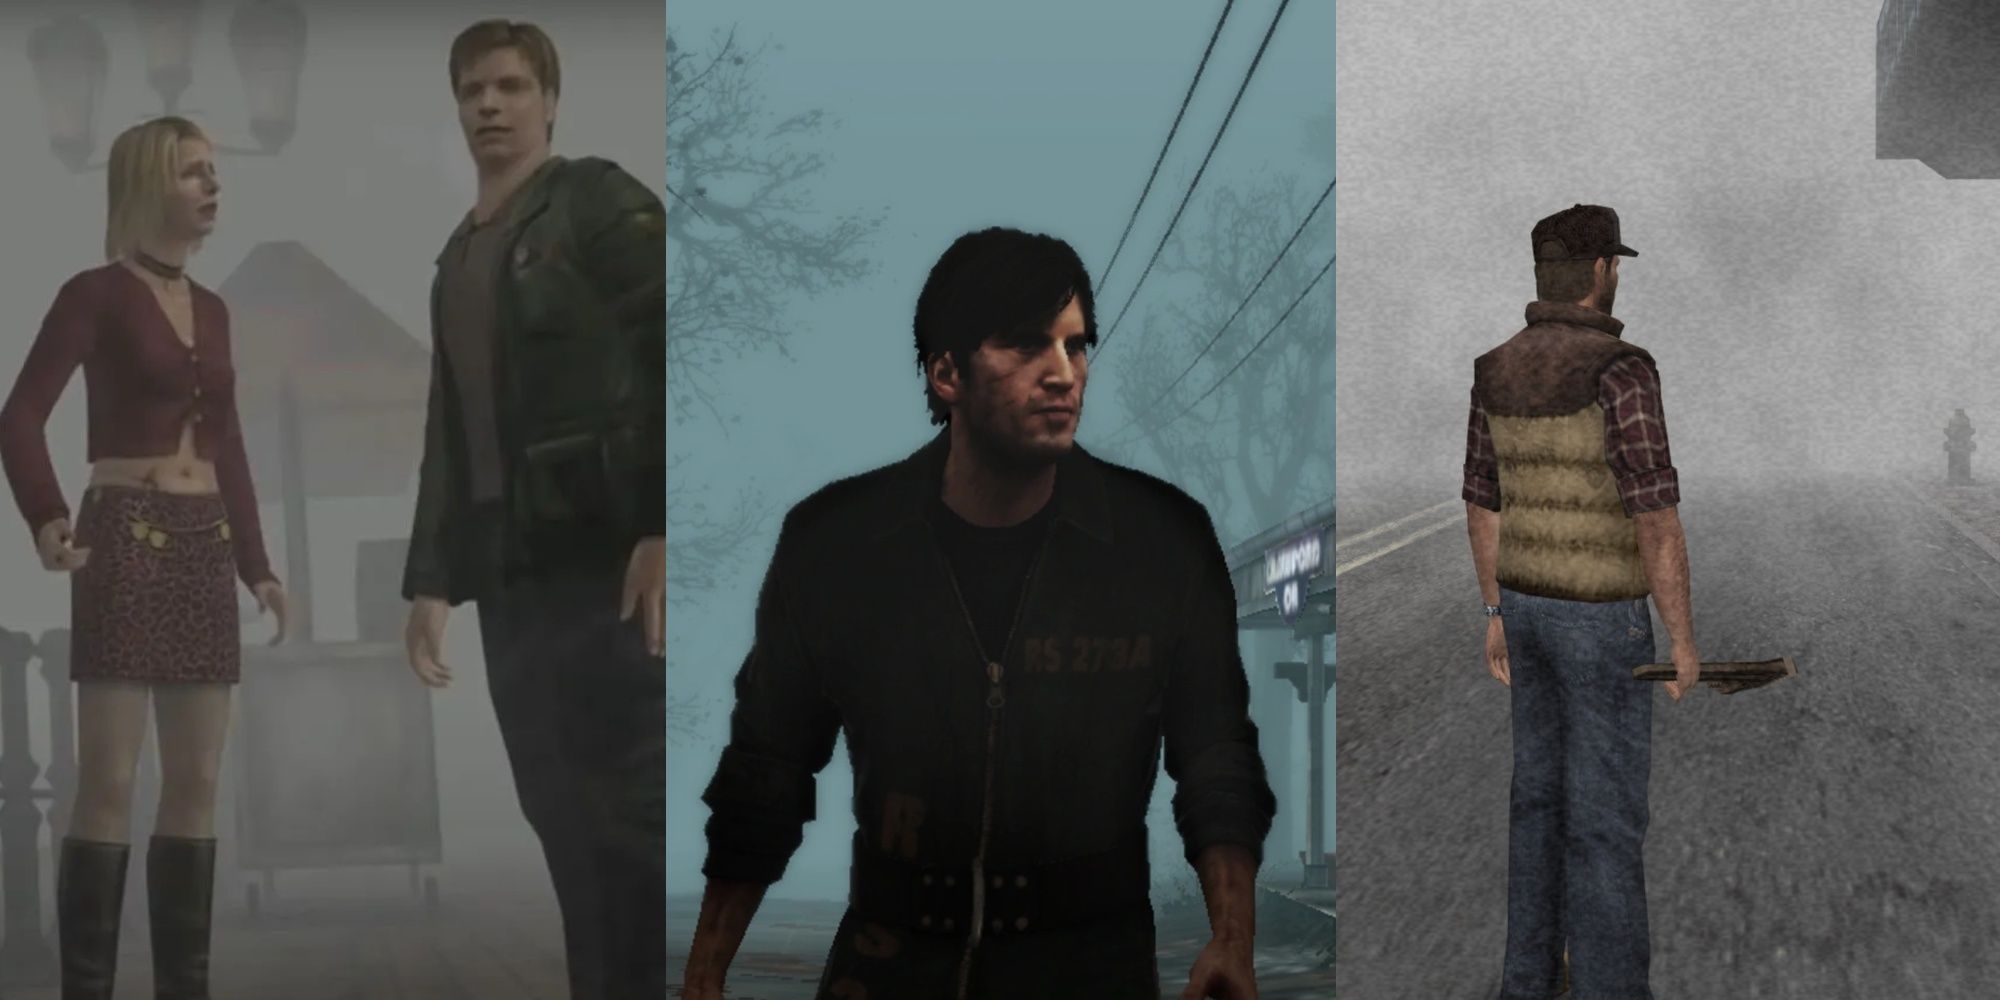 Silent Hill: James, Murphy And Travis In Their Versions Of Silent Hill